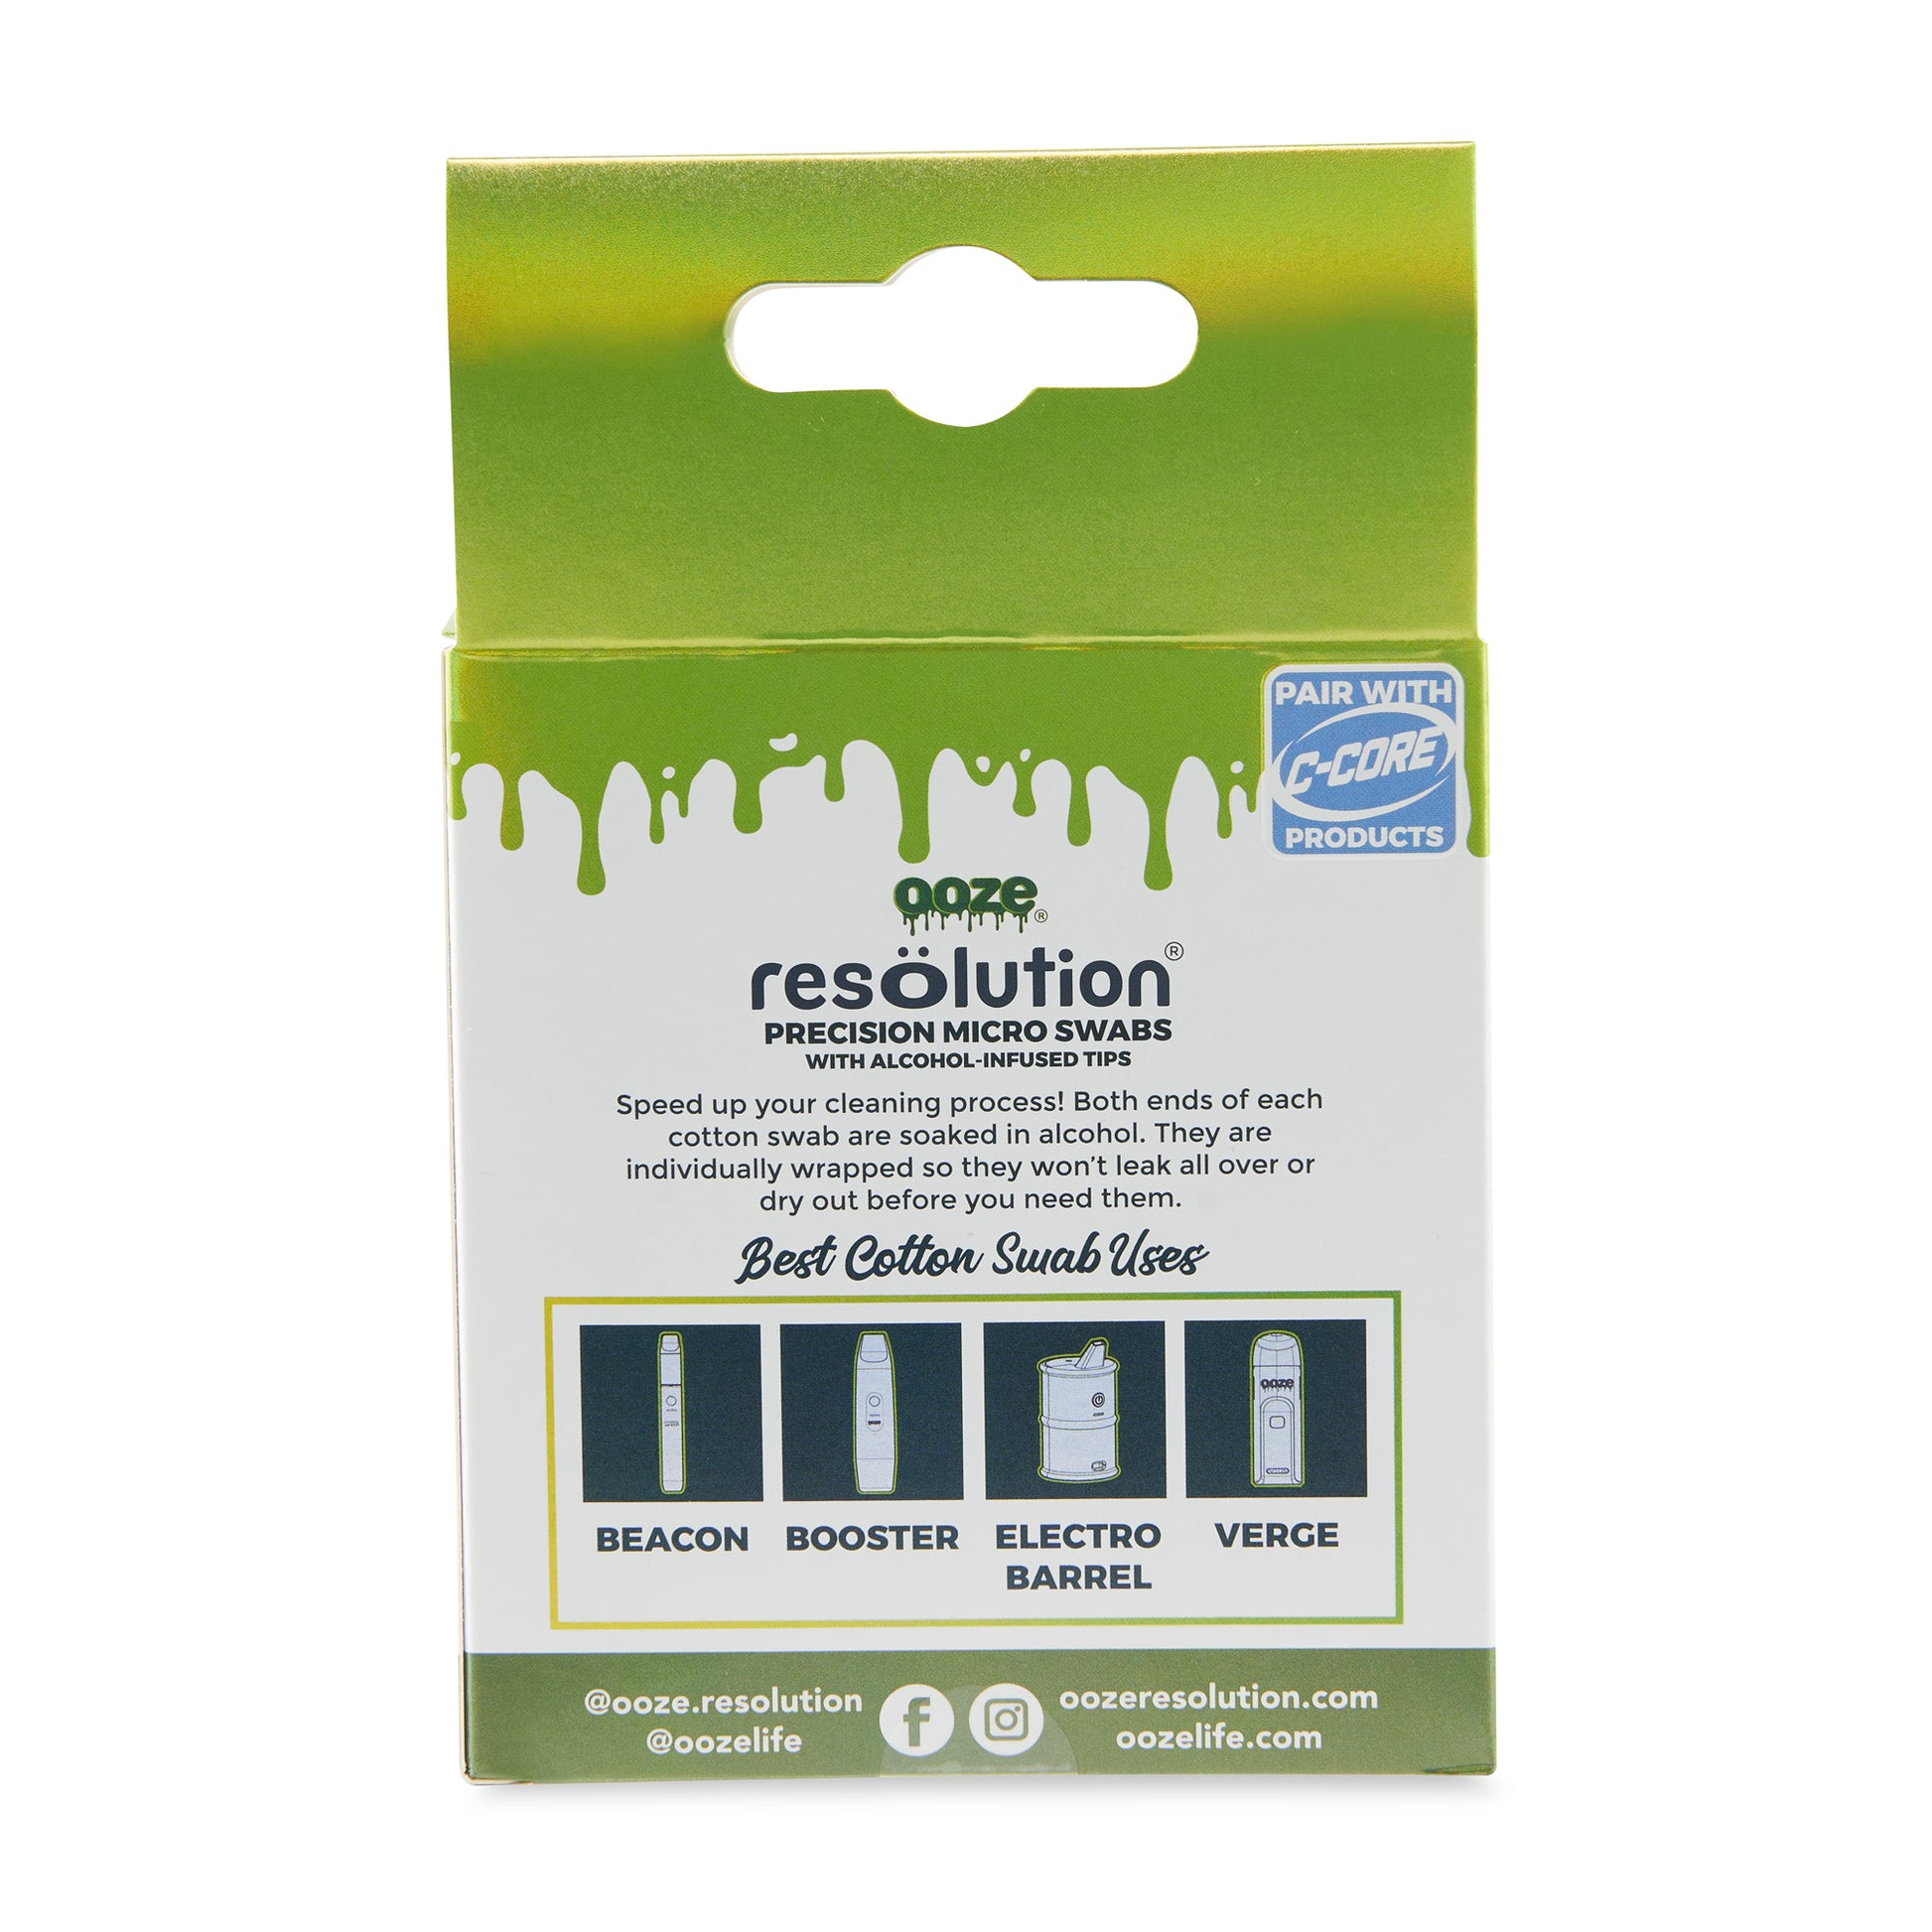 The back of a 100ct box of Ooze Resolution Micro Swabs